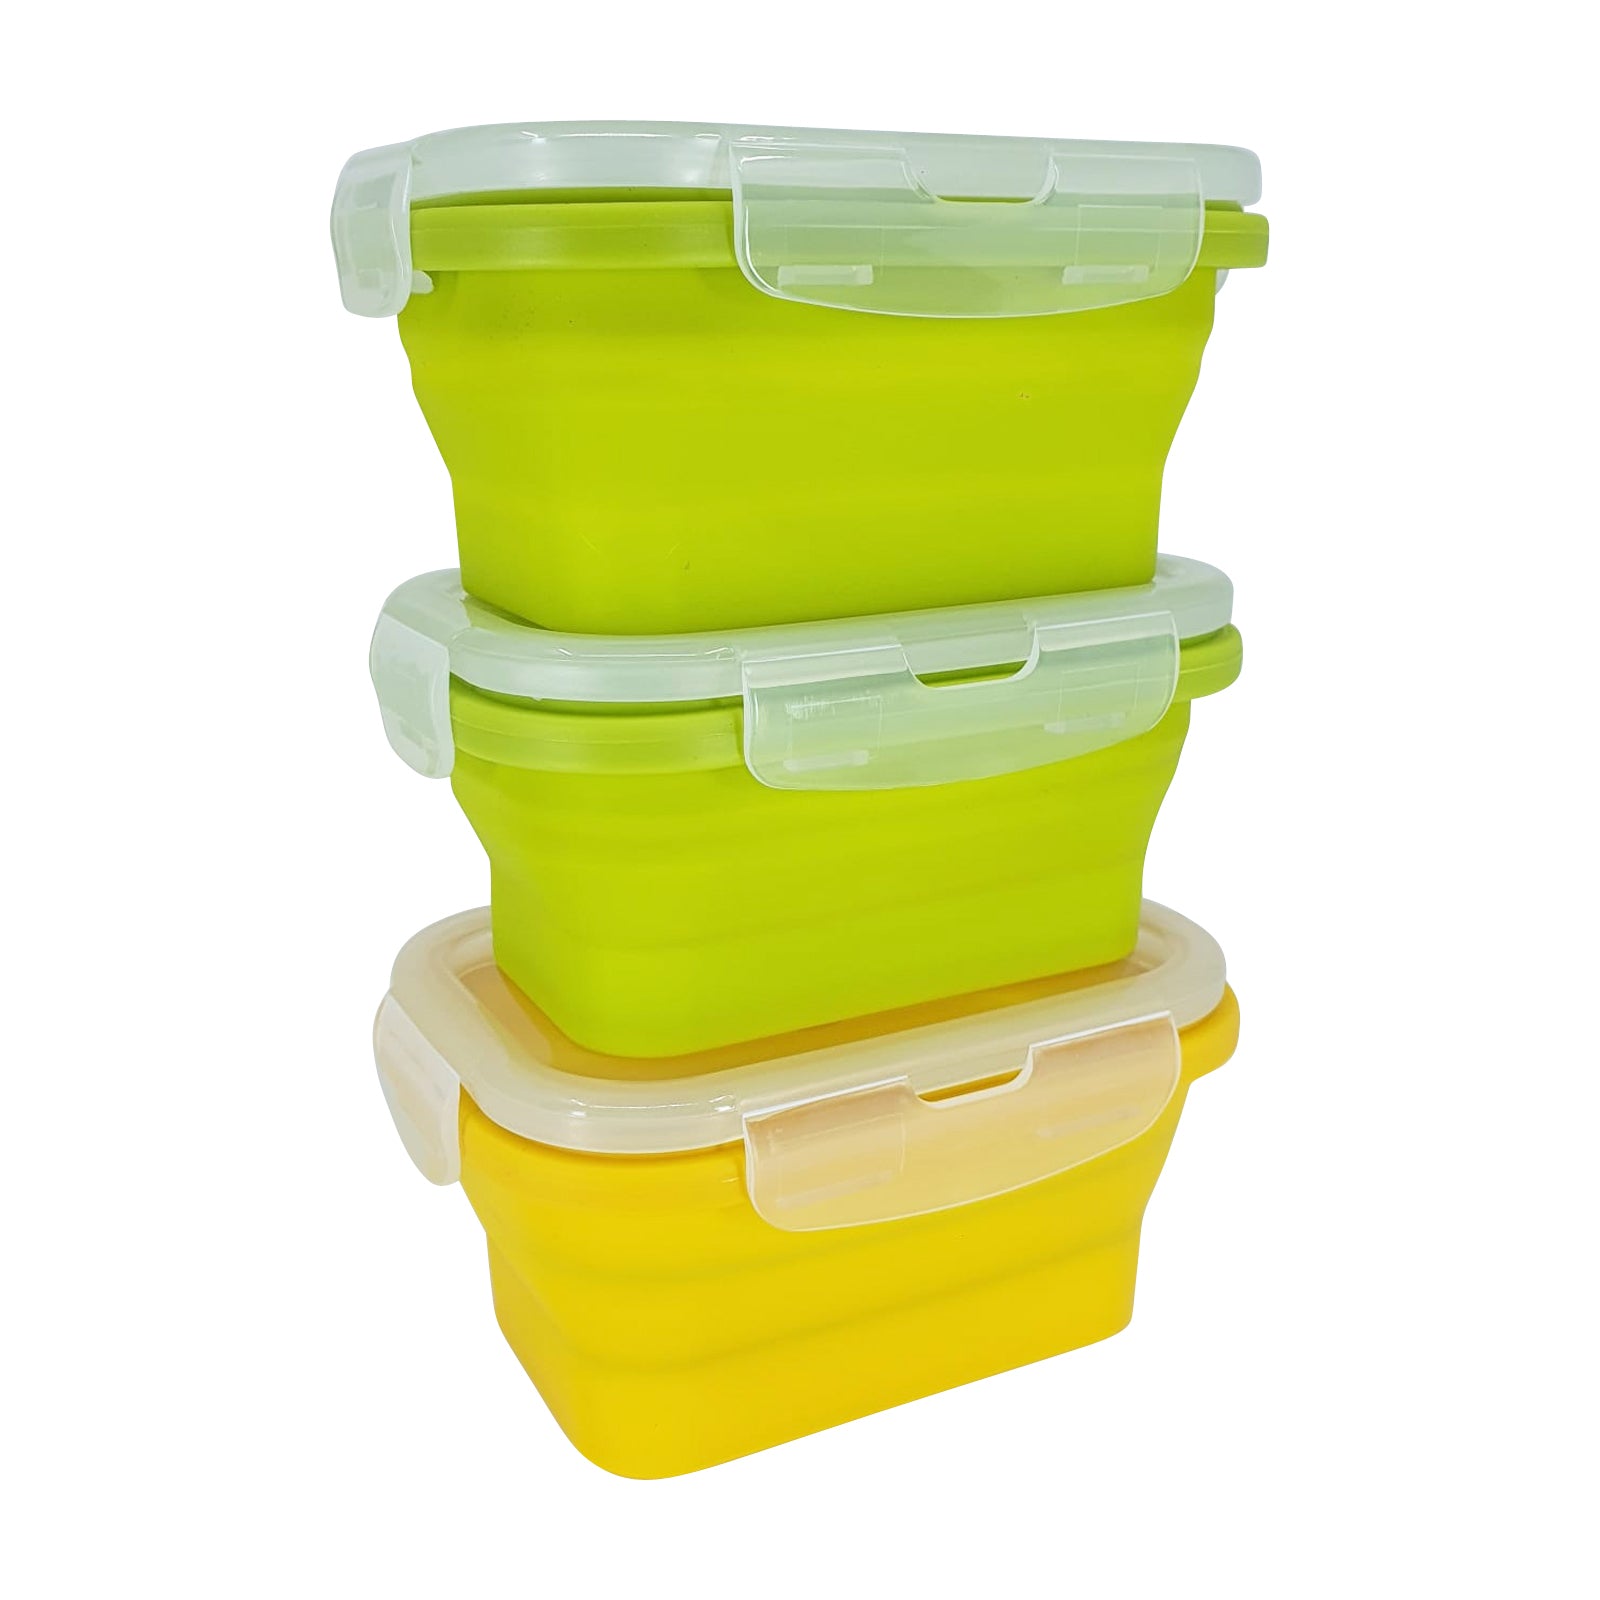 Flat Stacks USA - Space Saving Collapsible Silicone Containers